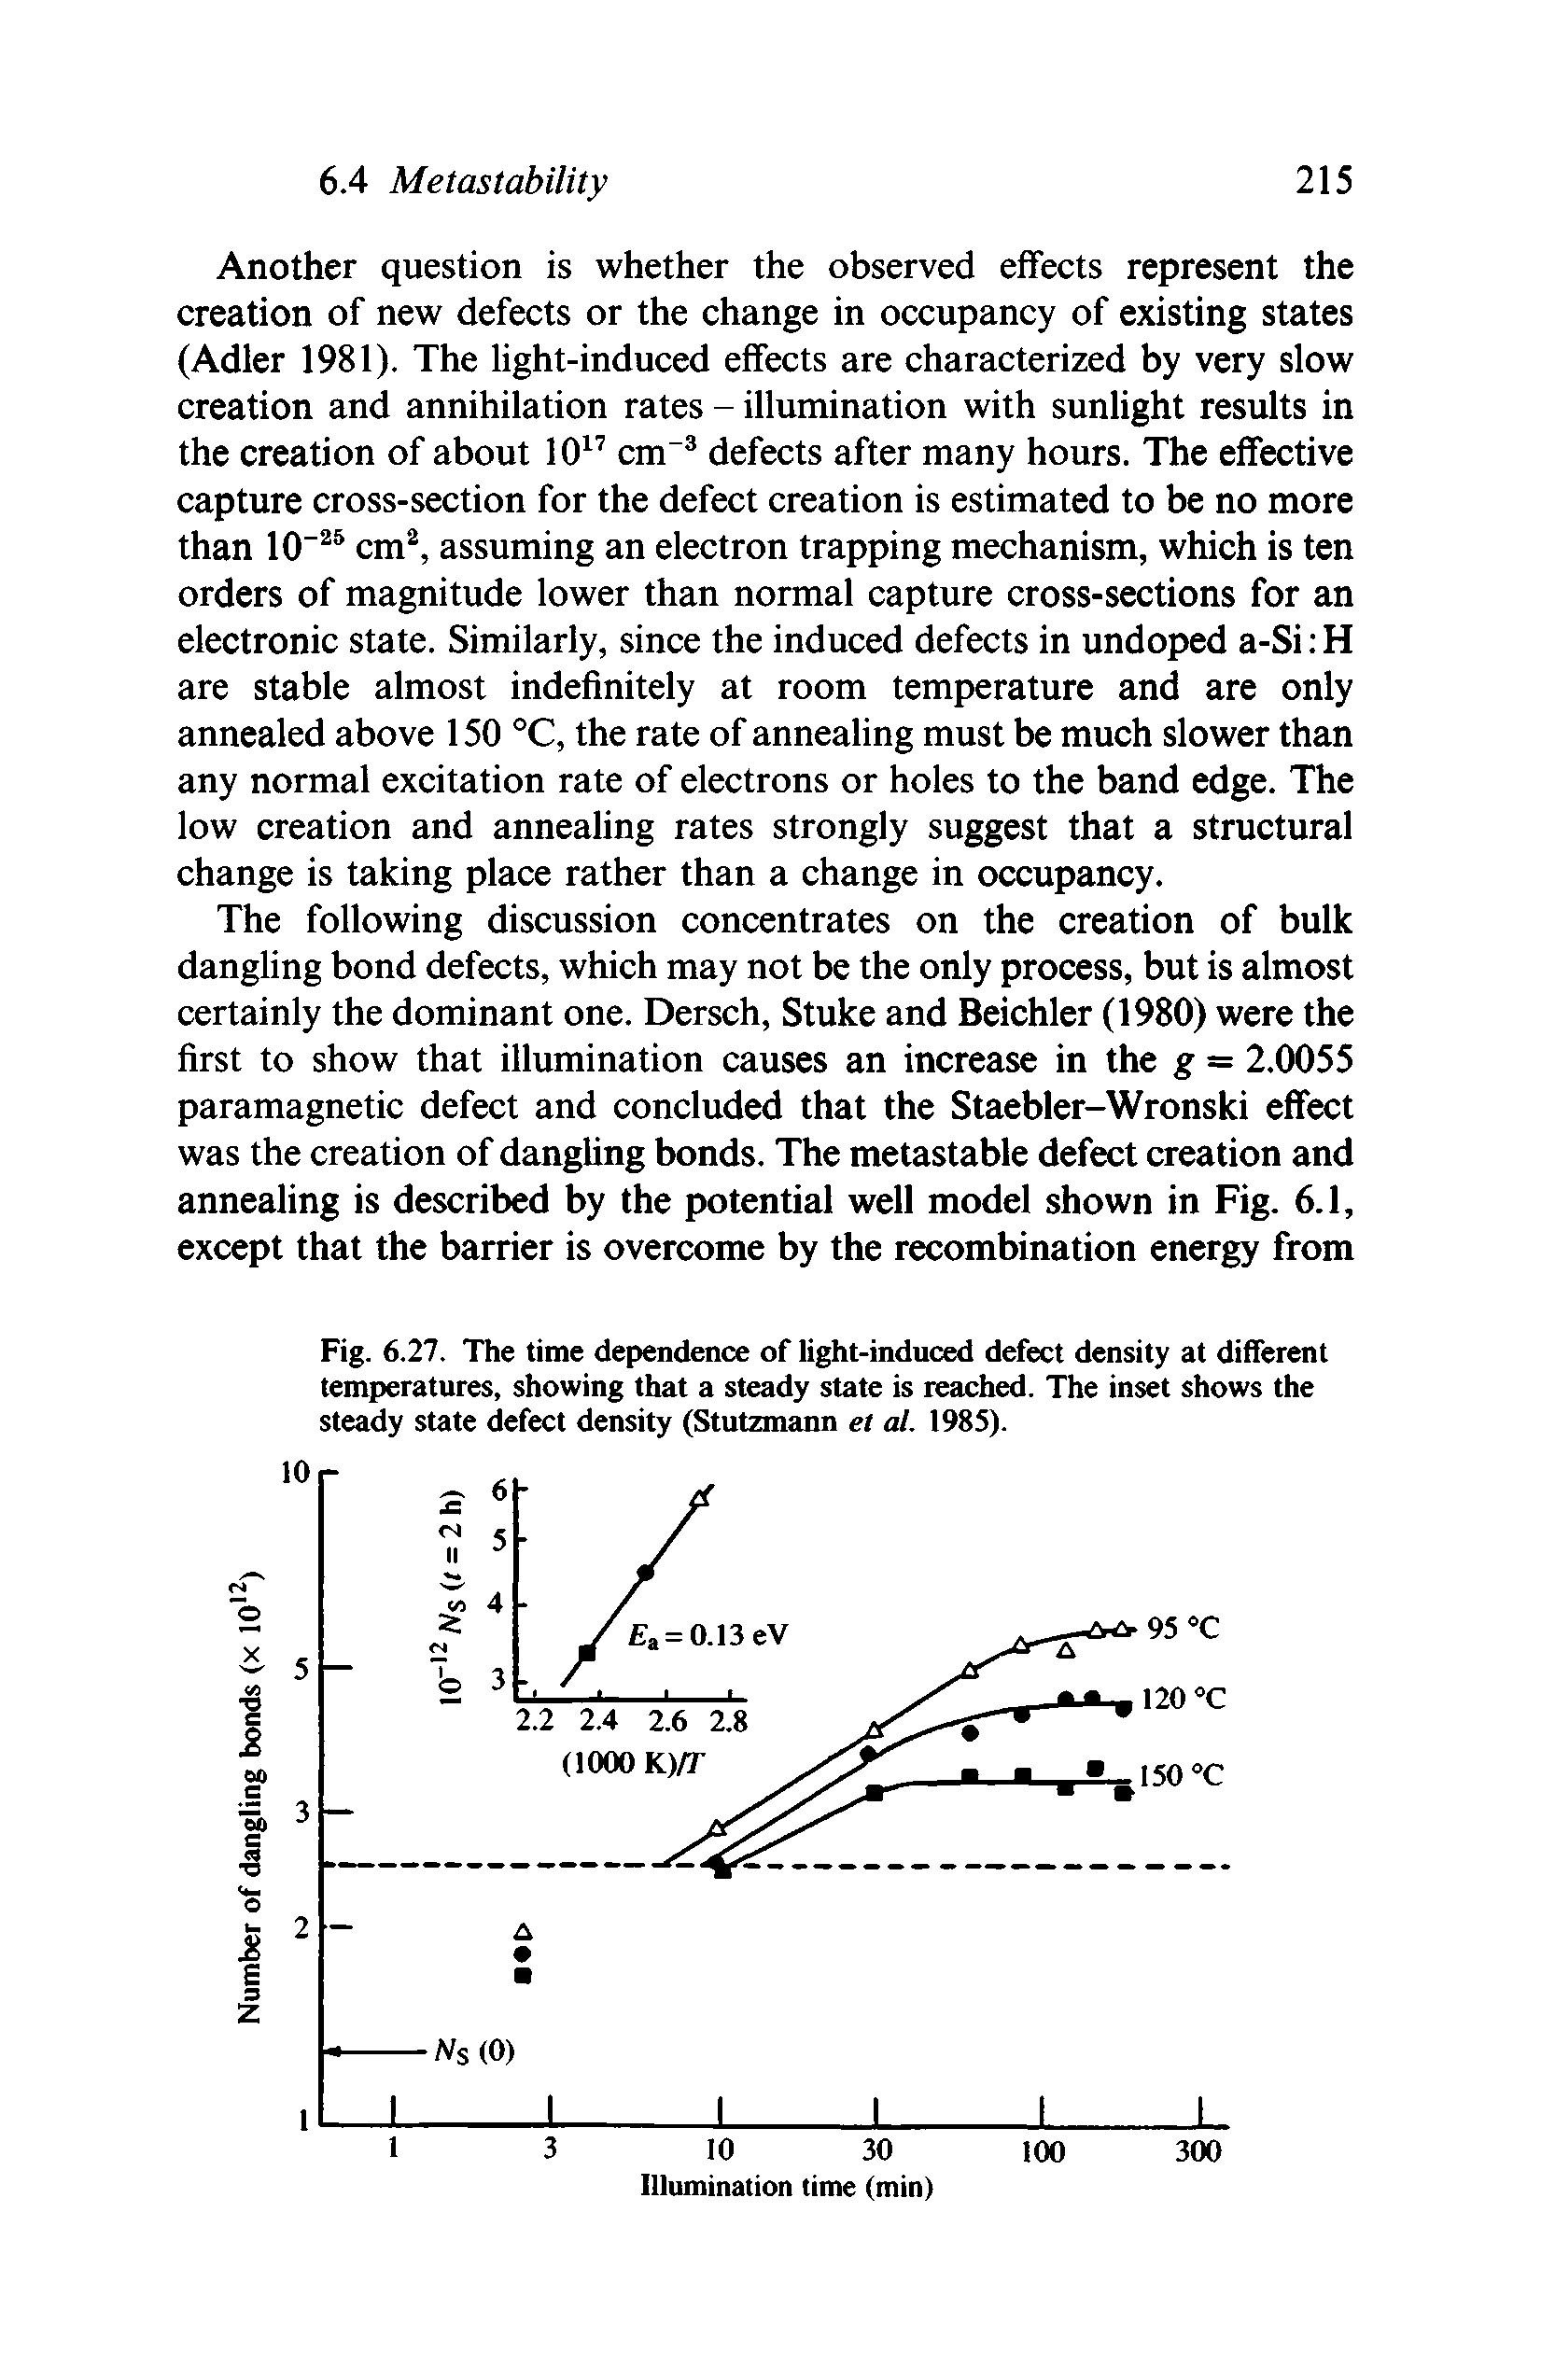 Fig. 6.27. The time dependence of light-induced defect density at different temperatures, showing that a steady state is reached. The inset shows the steady state defect density (Stutzmann et at. 1985).